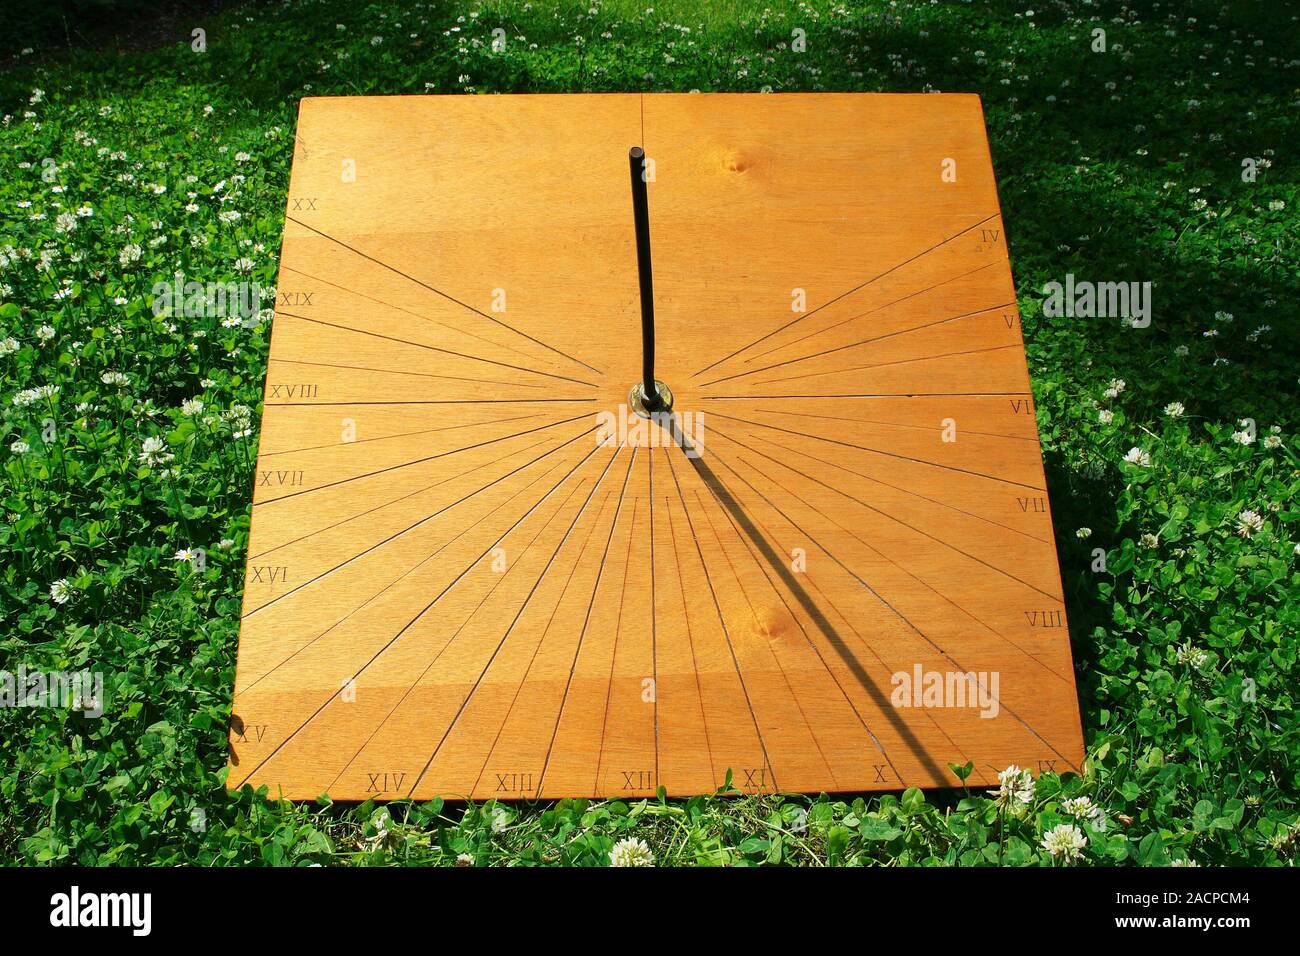 Equatorial sundial. On equatorial sundials, the planar surface that receives the shadow is exactly perpendicular to the gnomon's style (central bar). Stock Photo